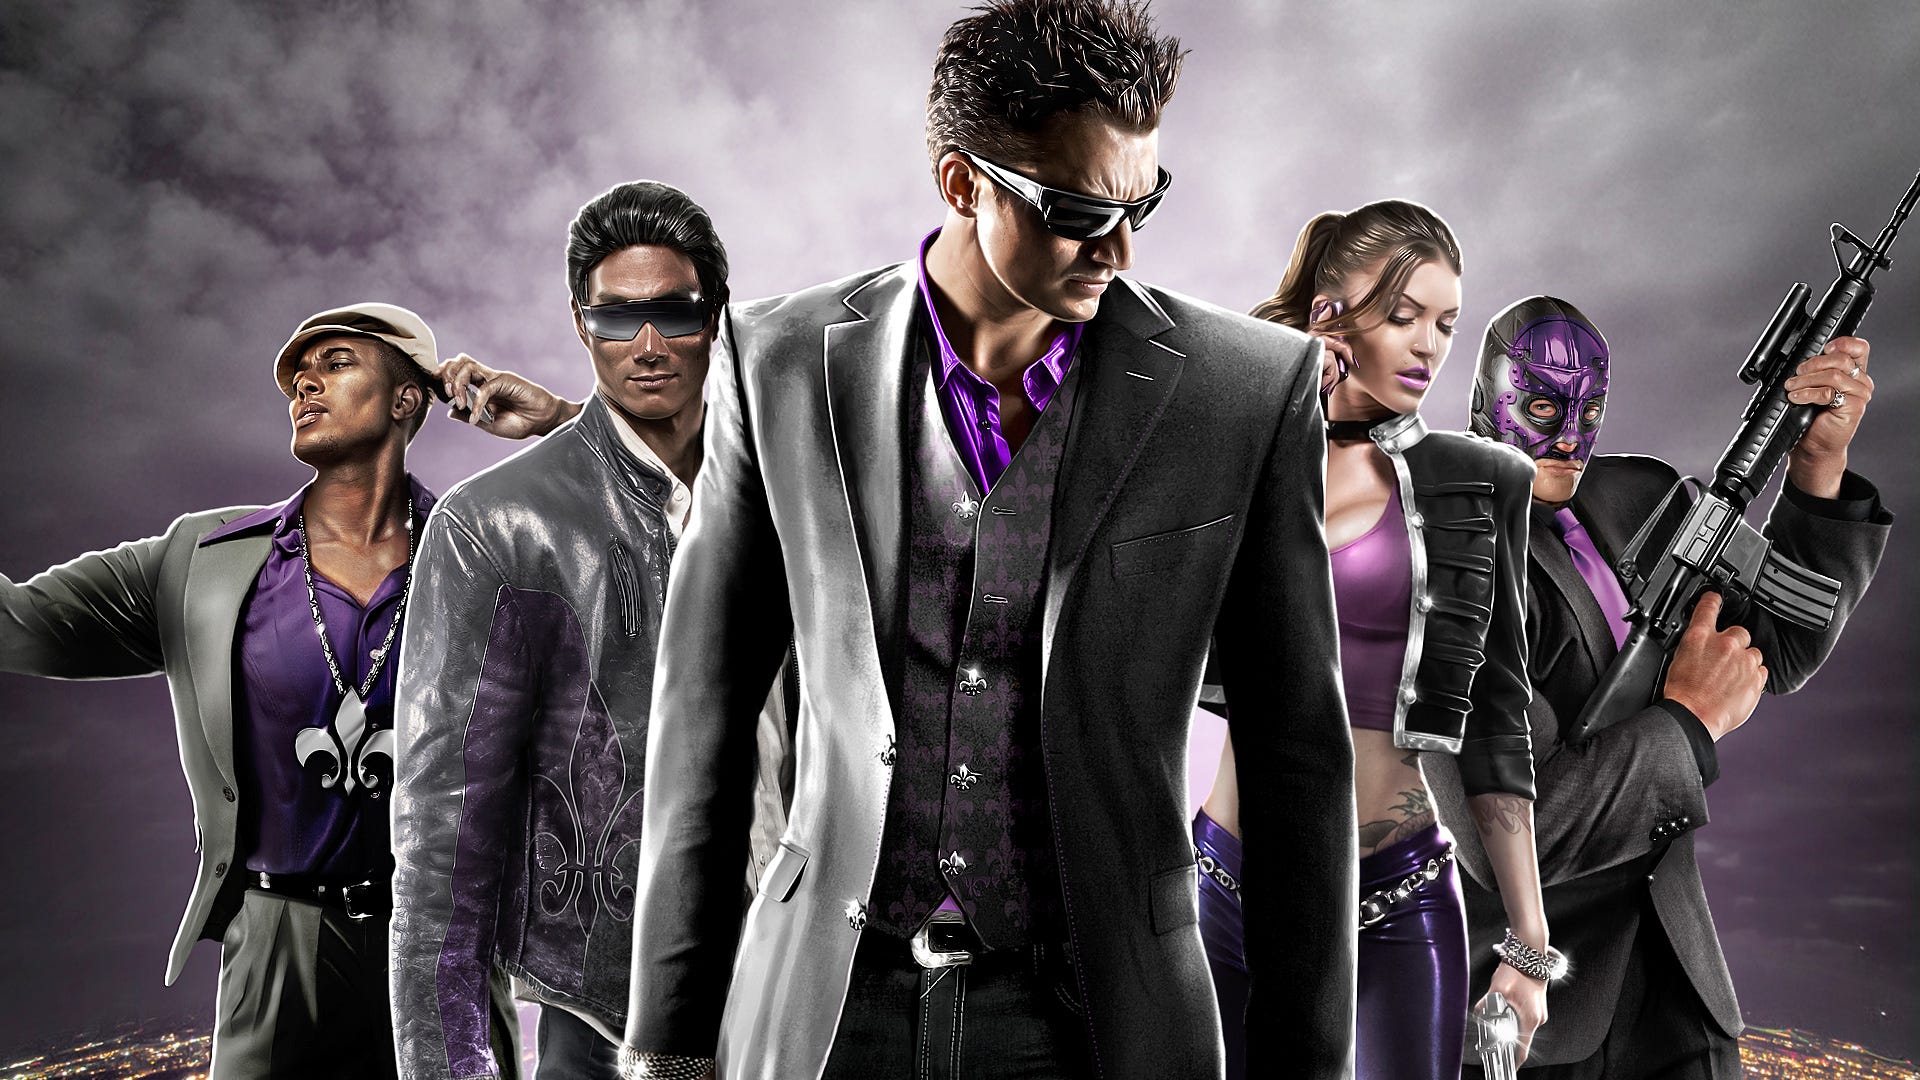 Volition, developer of Saints Row, shuttered after 30 years